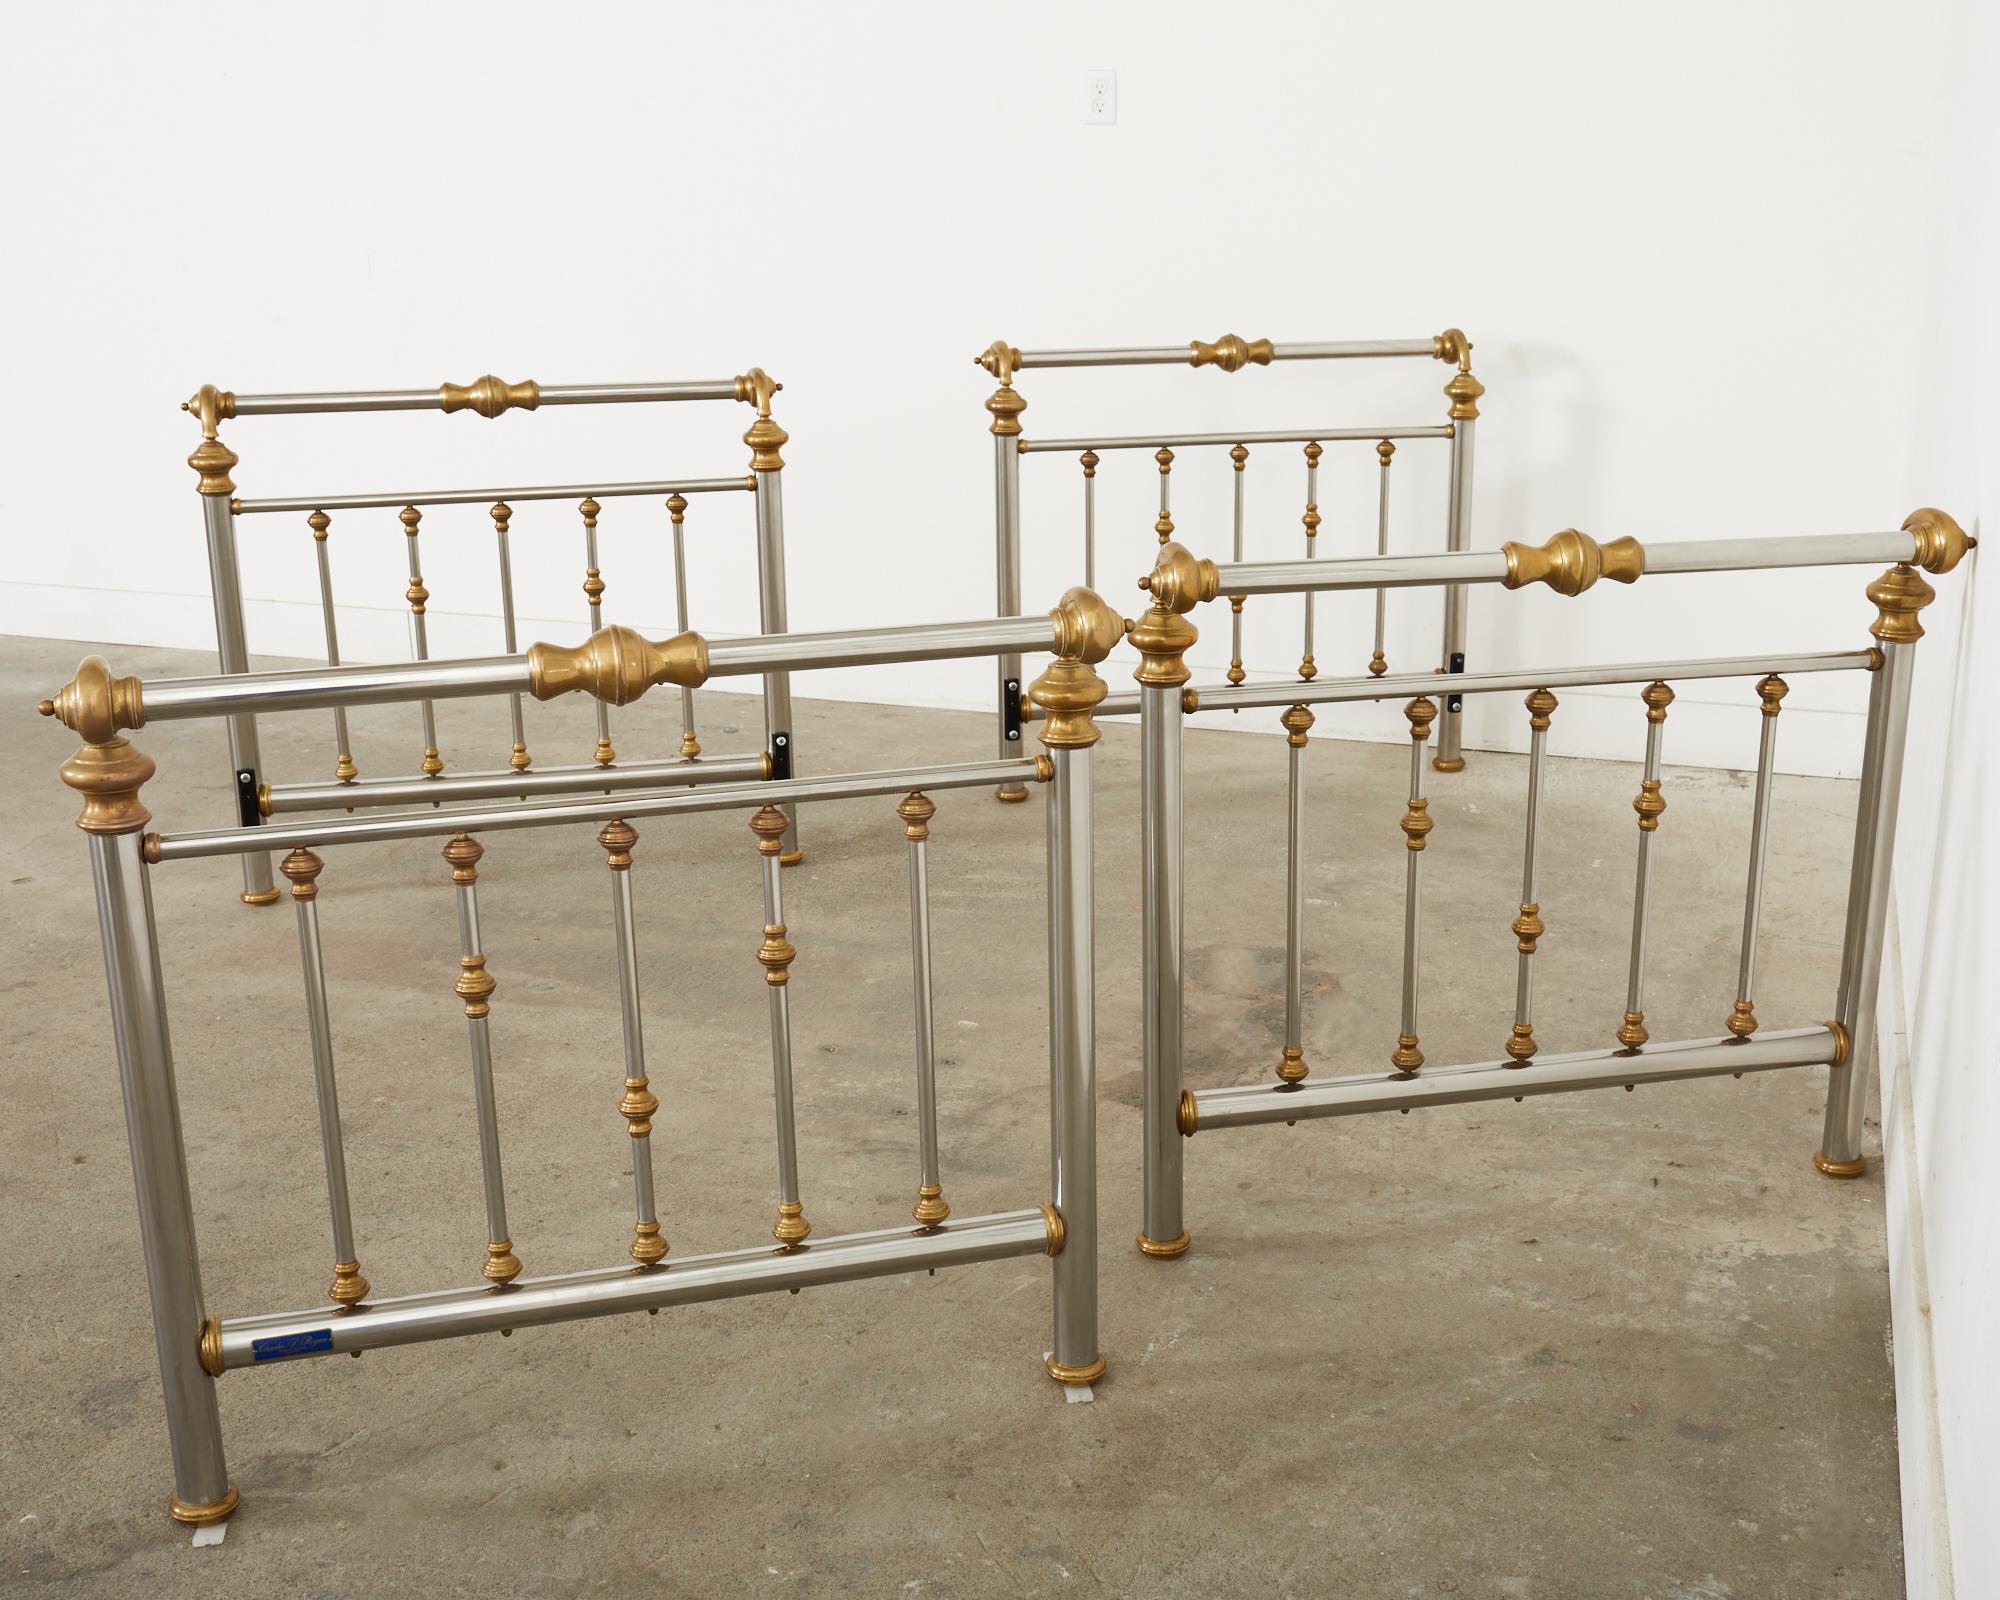 Matching pair of English Victorian style twin sleigh beds crafted from patinated brass and polished steel. The set includes two headboards and two footboards ready to bolt to twin bed frames. The beds include necessary hardware to bolt to frames.